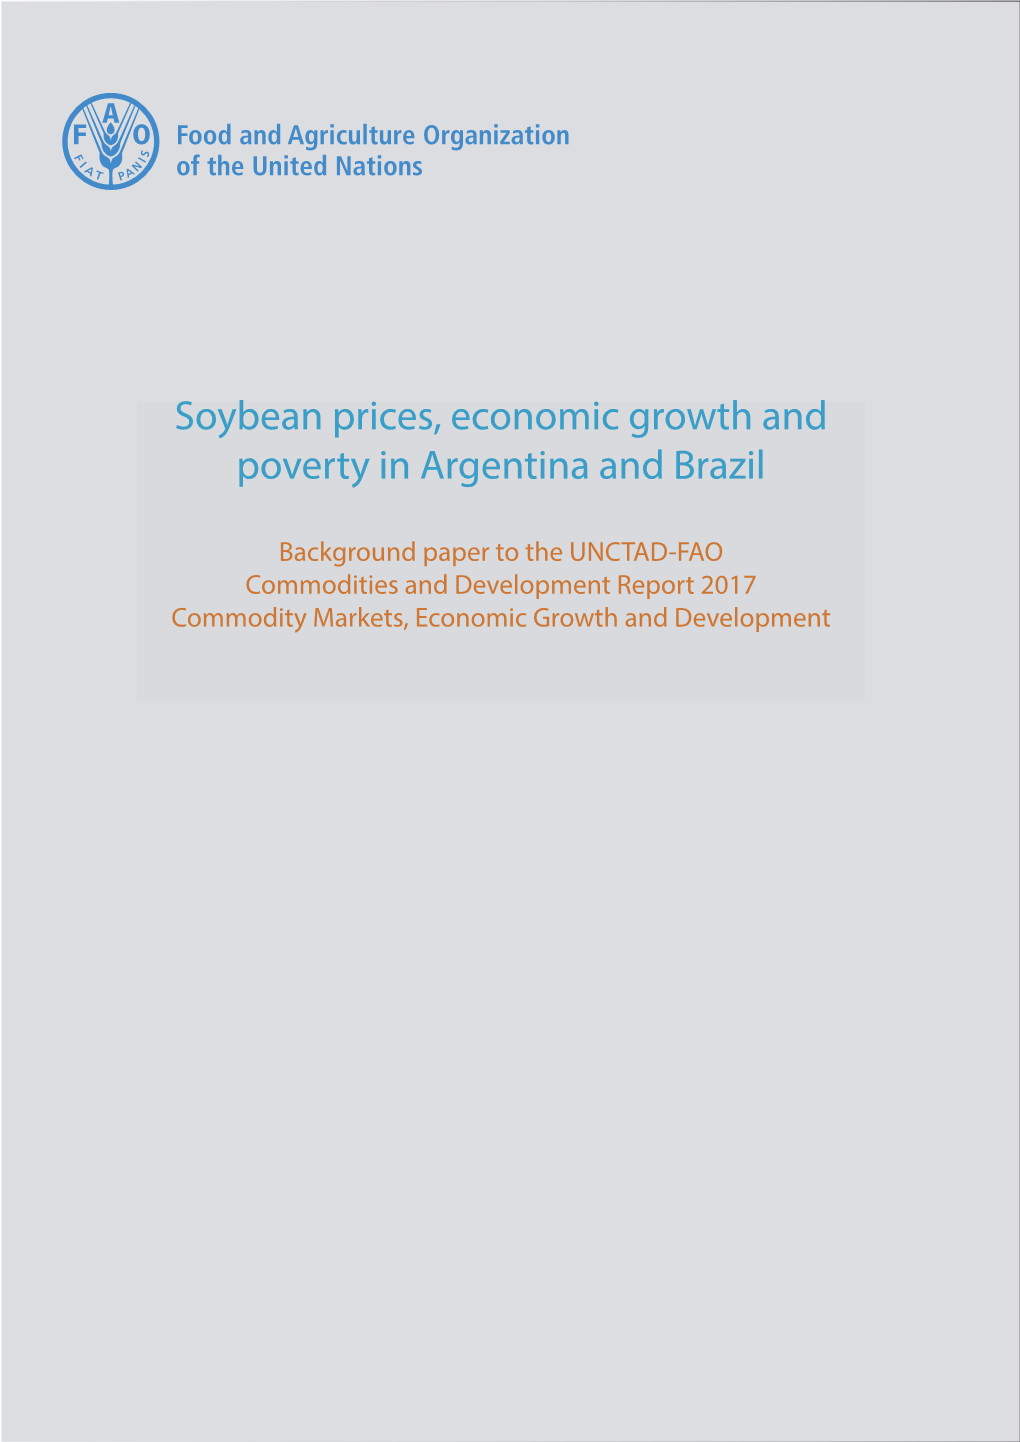 Soybean Prices, Economic Growth and Poverty in Argentina and Brazil